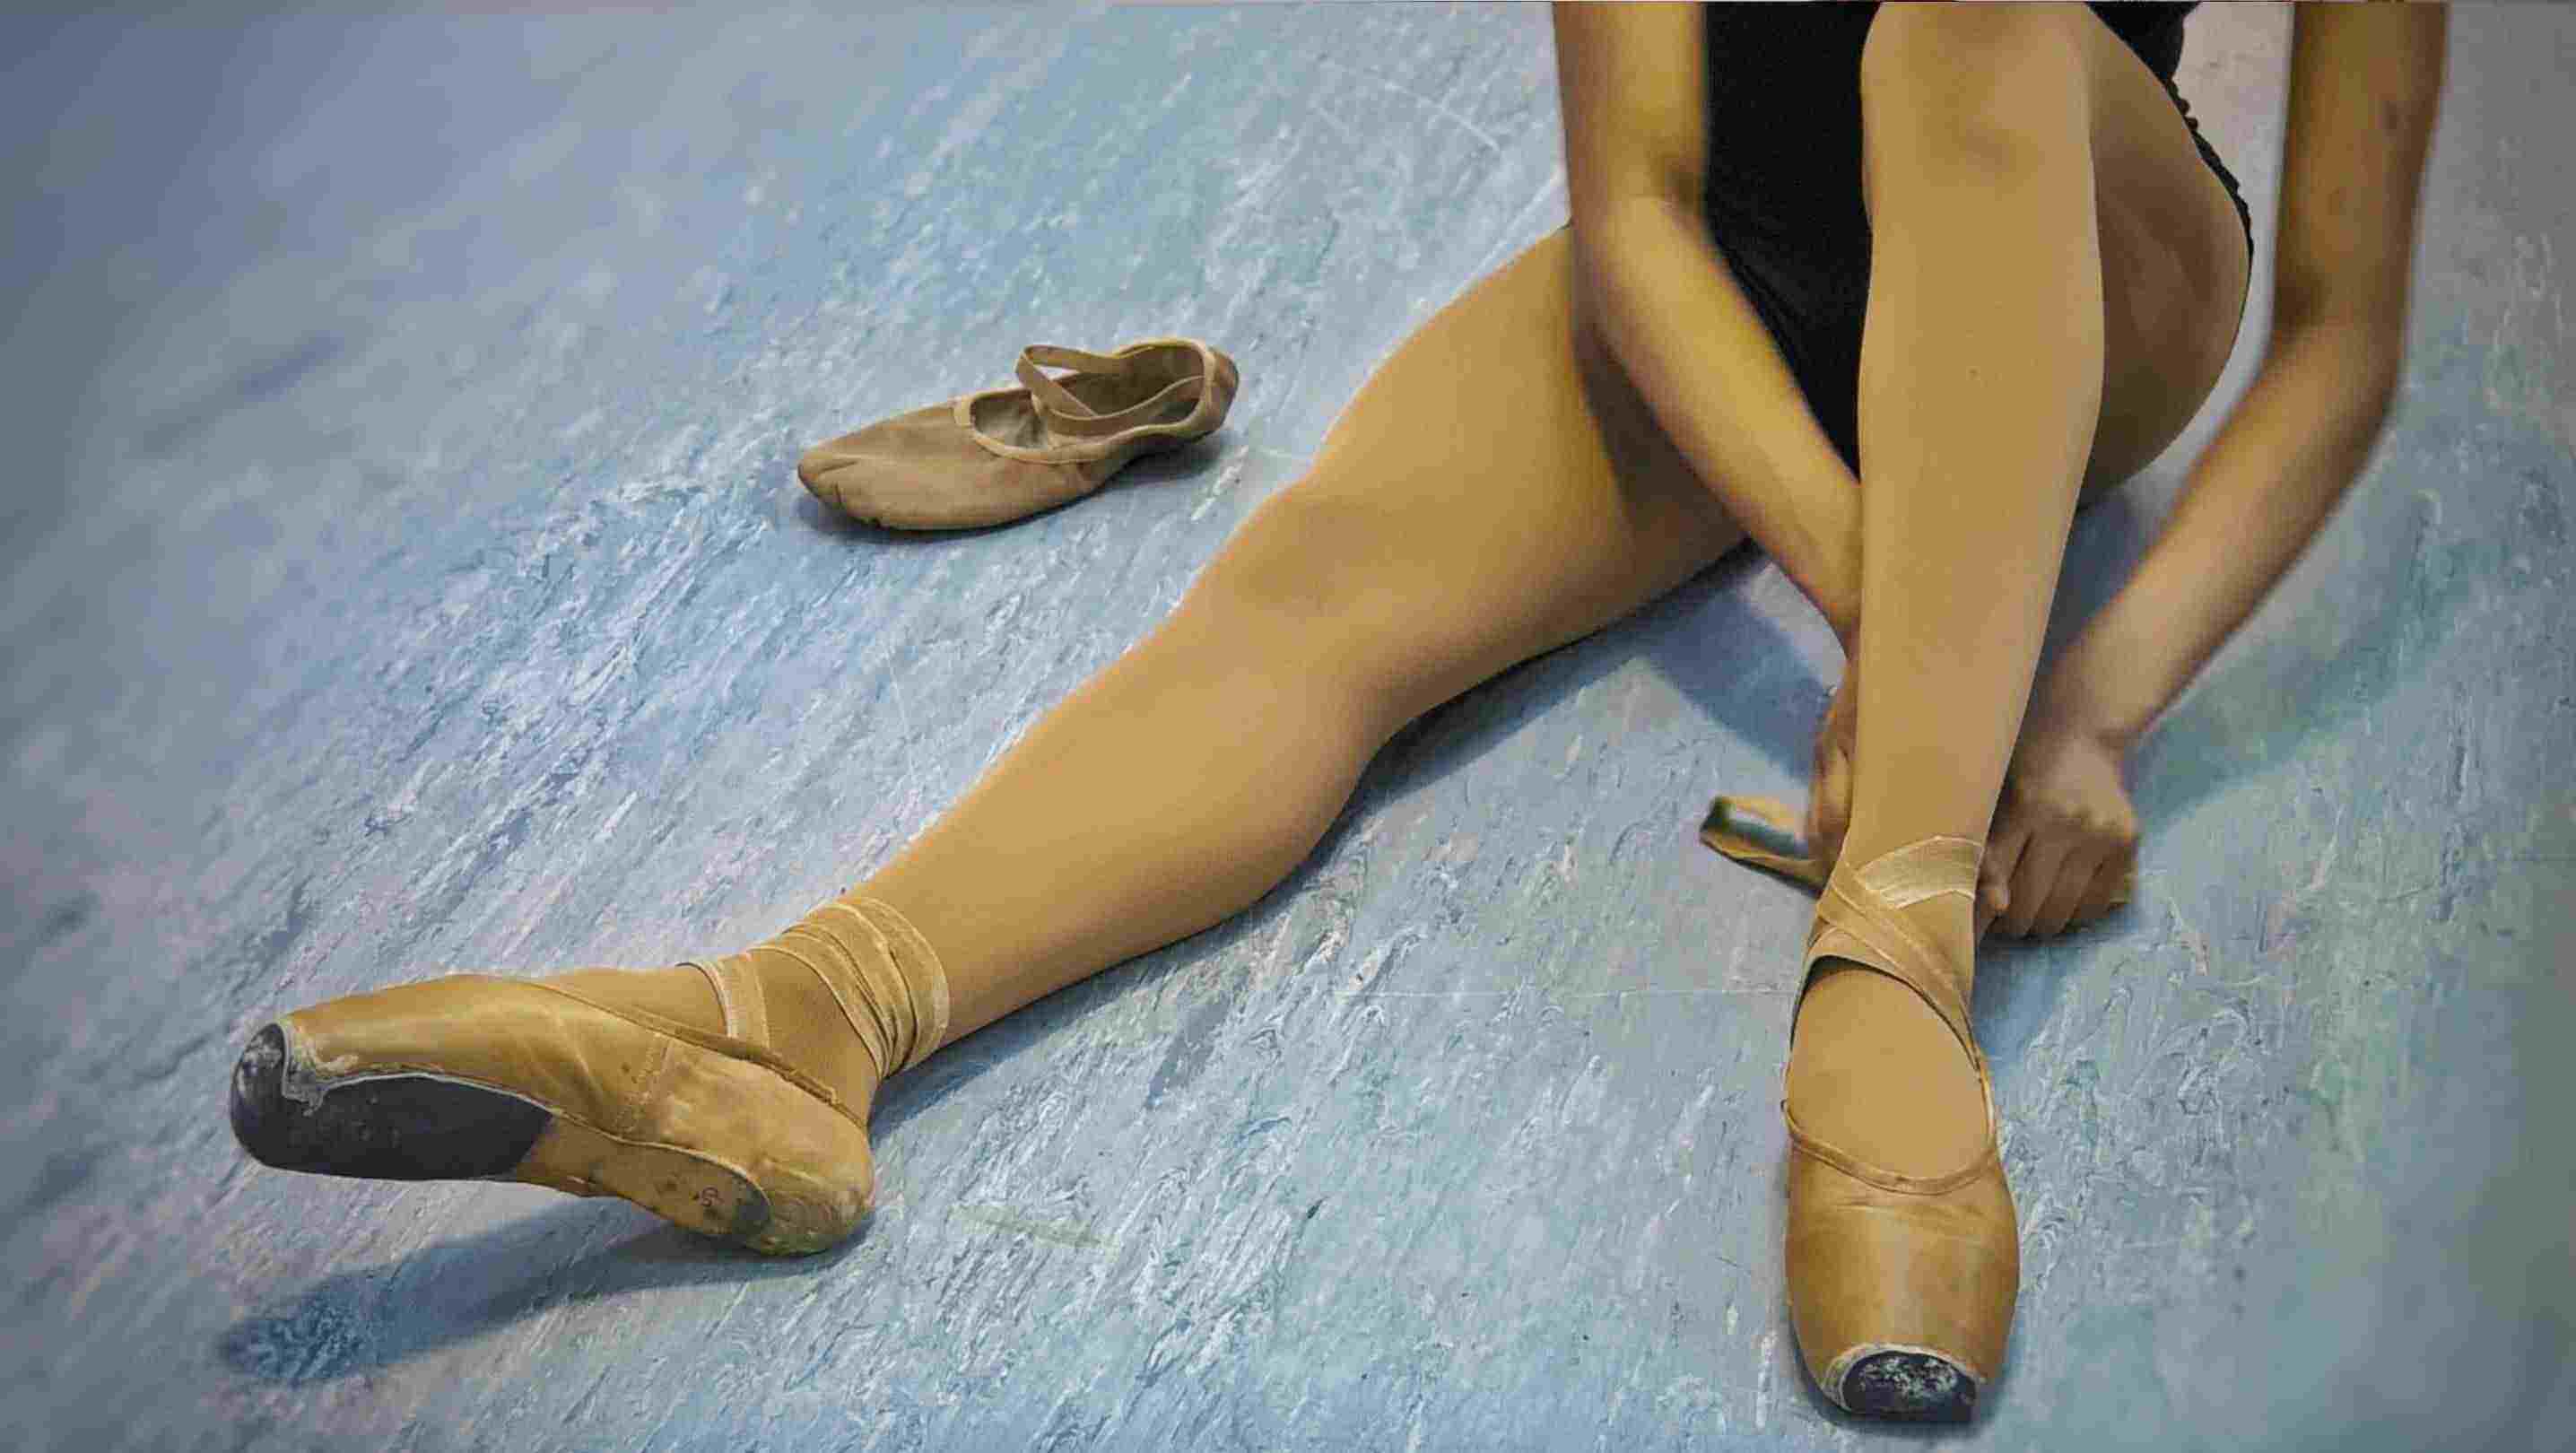 Flesh-tone tights empower ballet dancers of color - Medill Reports Chicago